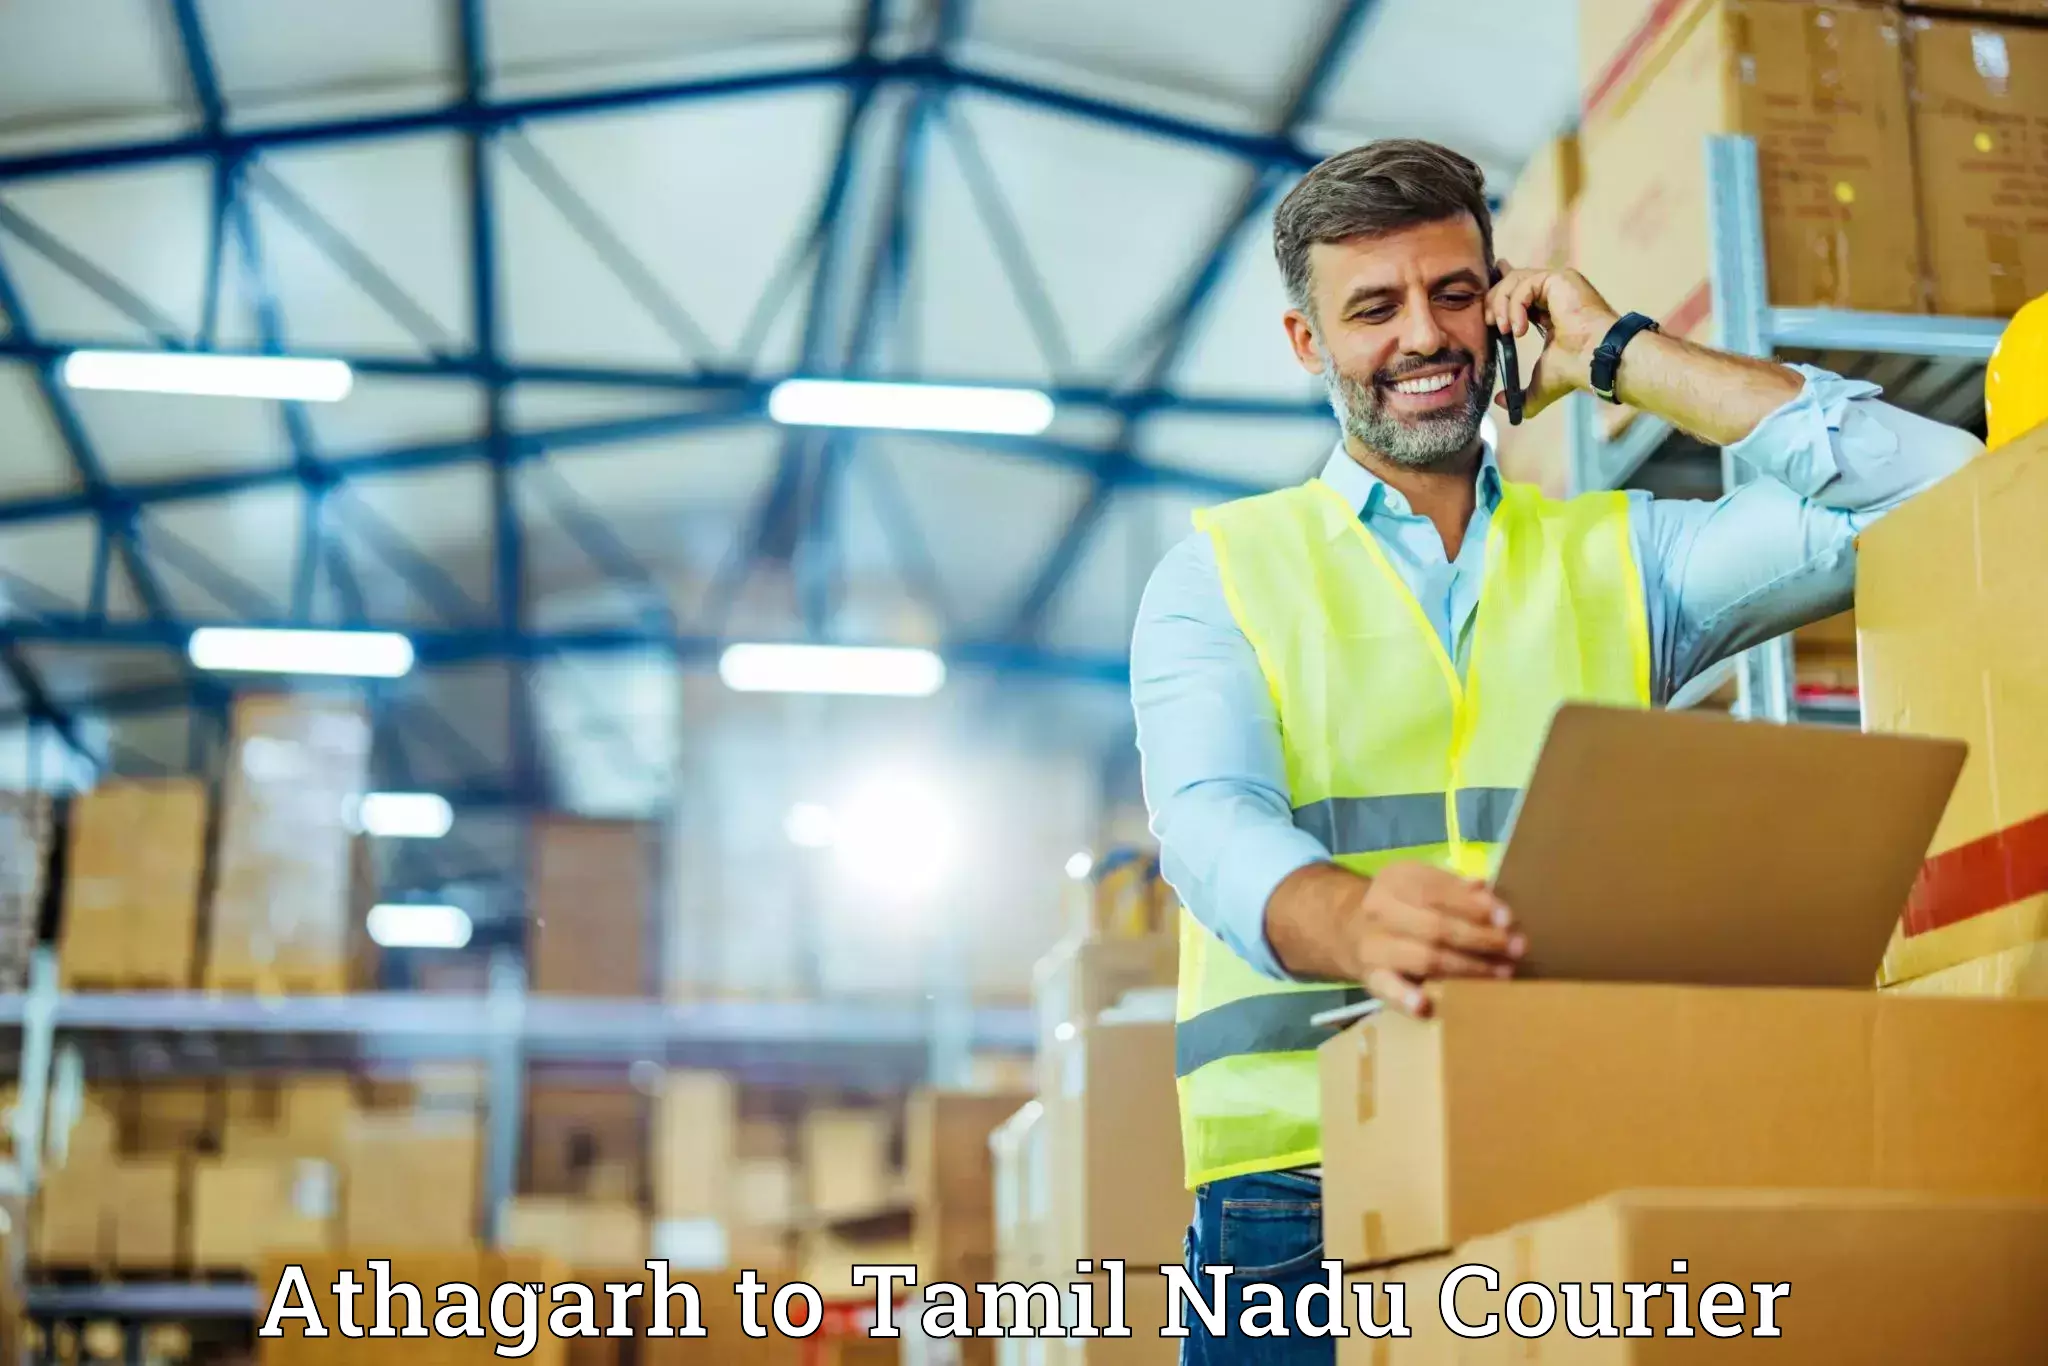 Furniture moving specialists Athagarh to Ennore Port Chennai